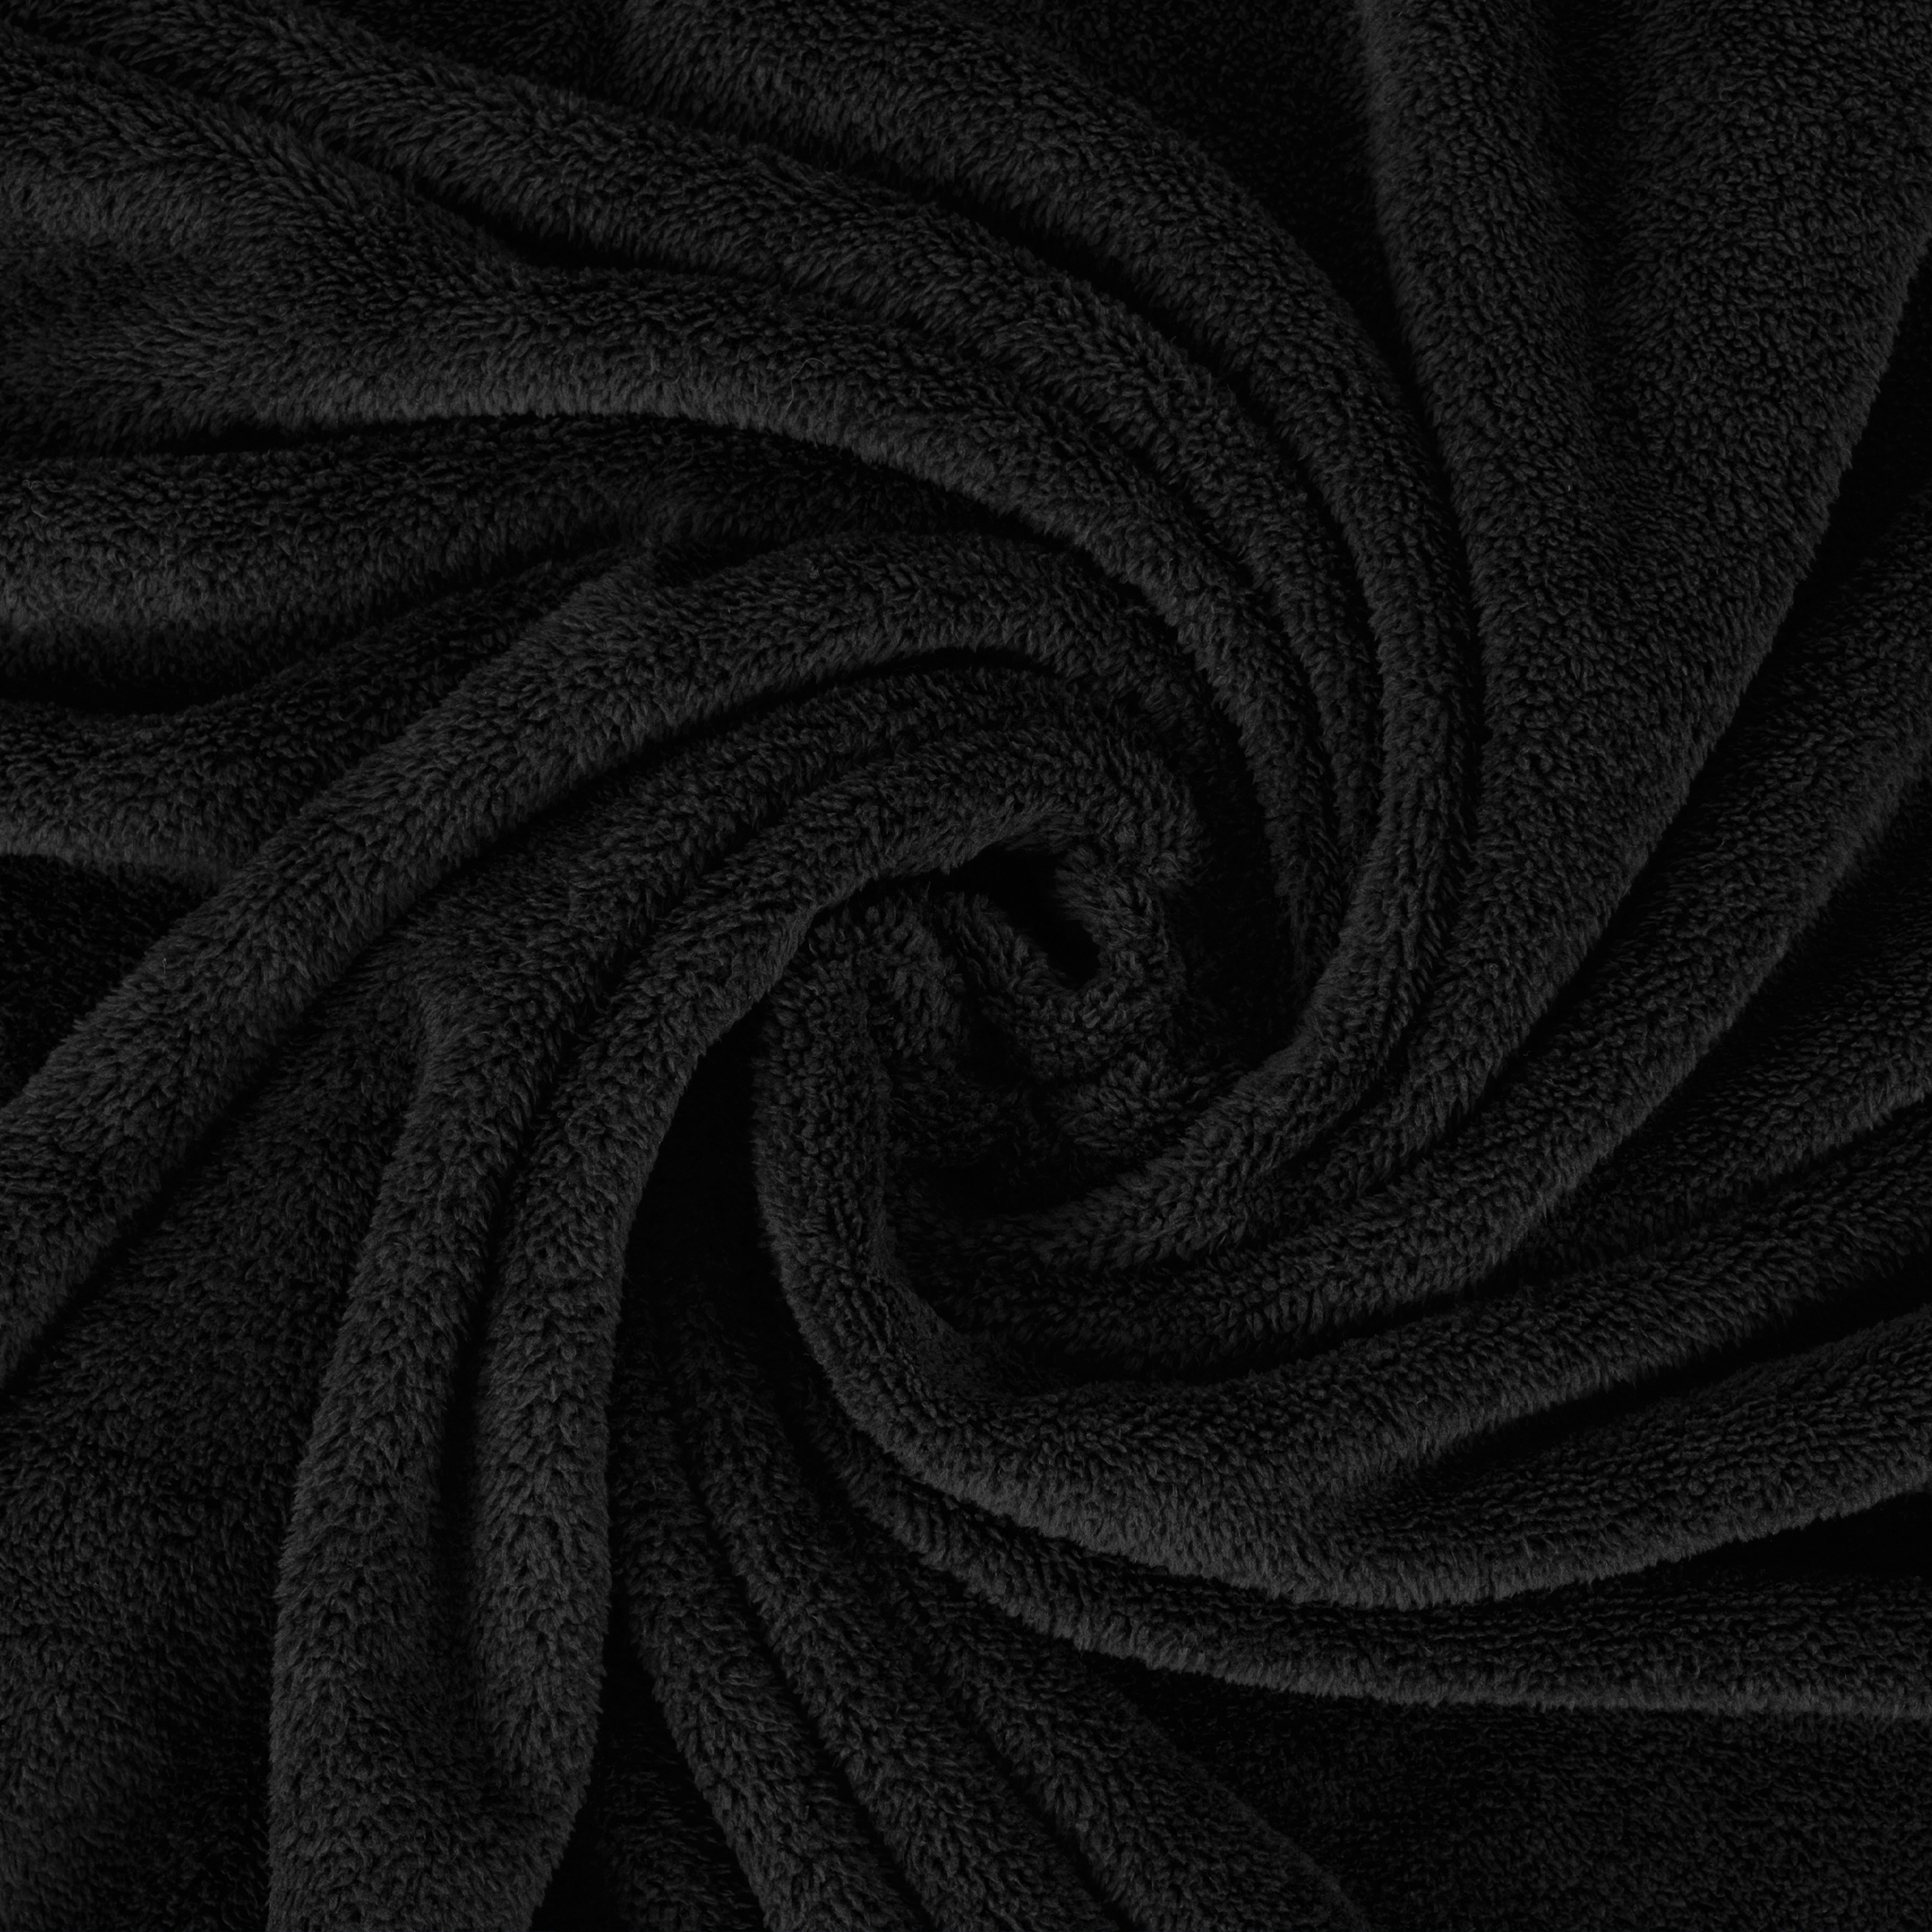 American Soft Linen - Bedding Fleece Blanket - Wholesale - 24 Set Case Pack - Throw Size 50x60 inches - Black - 5